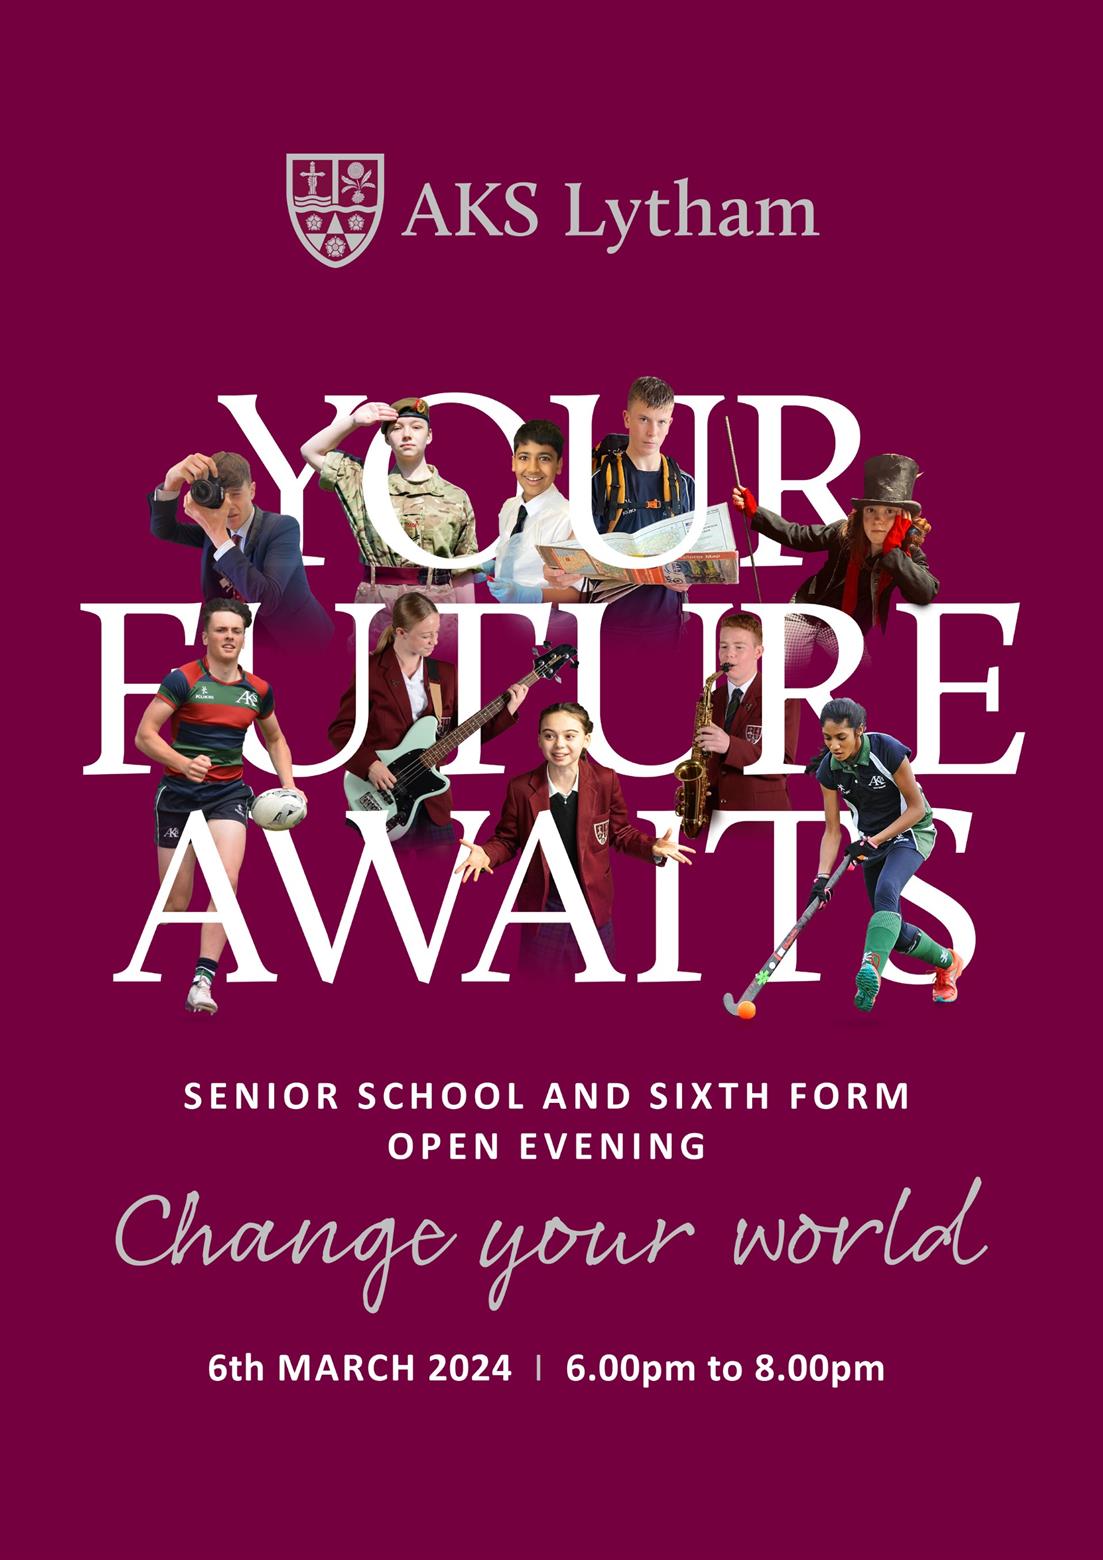 Senior School and Sixth Form Open Evening: 6th March